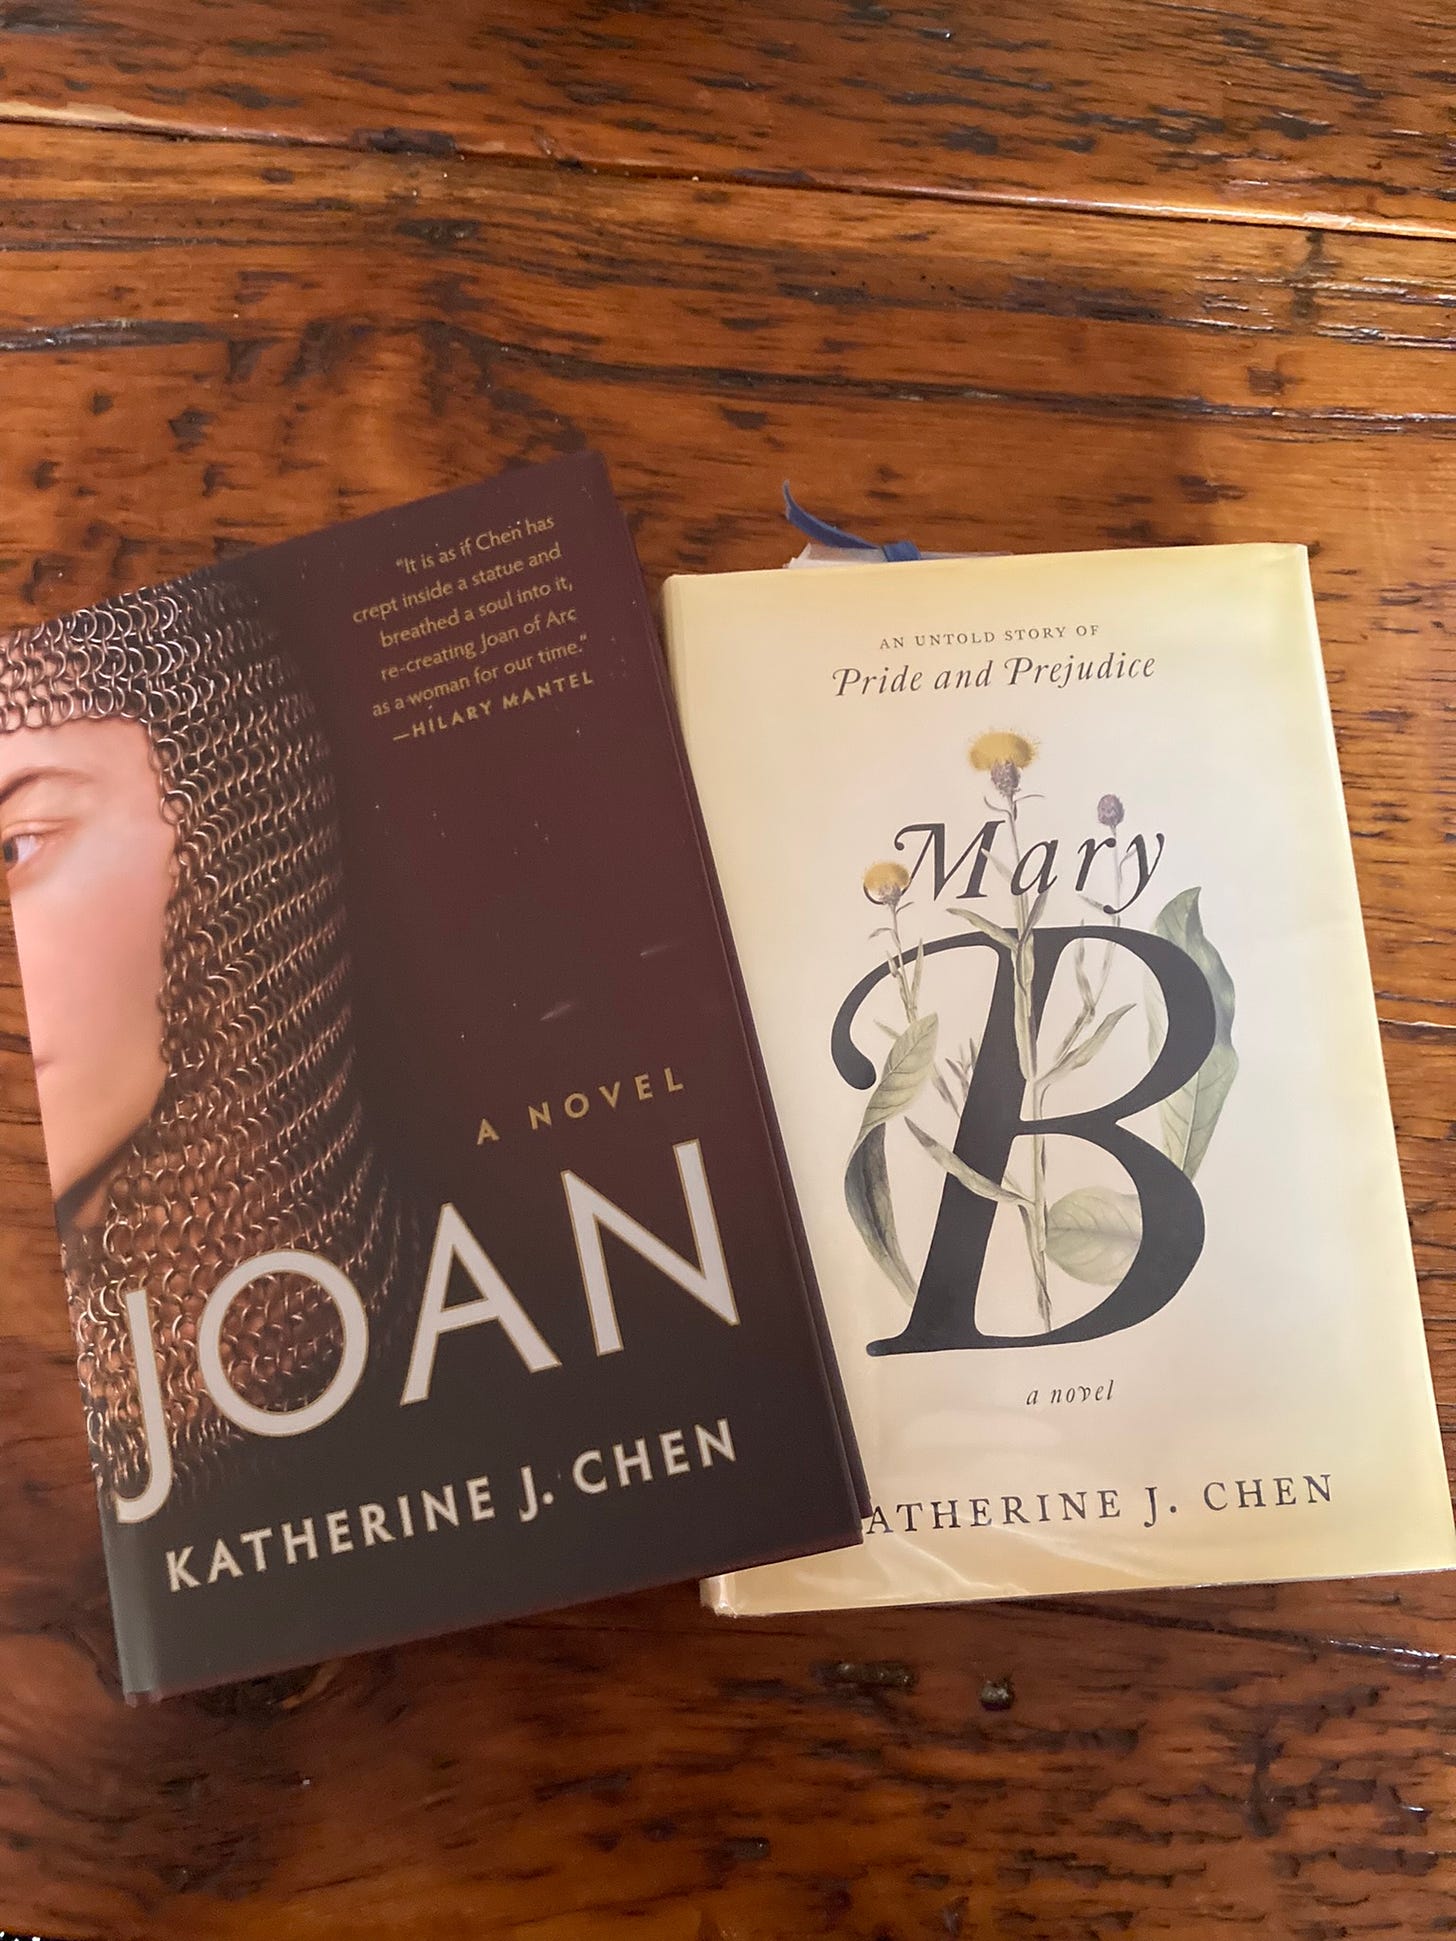 Cover of Joan and Mary B. both by Katherine J. Chen